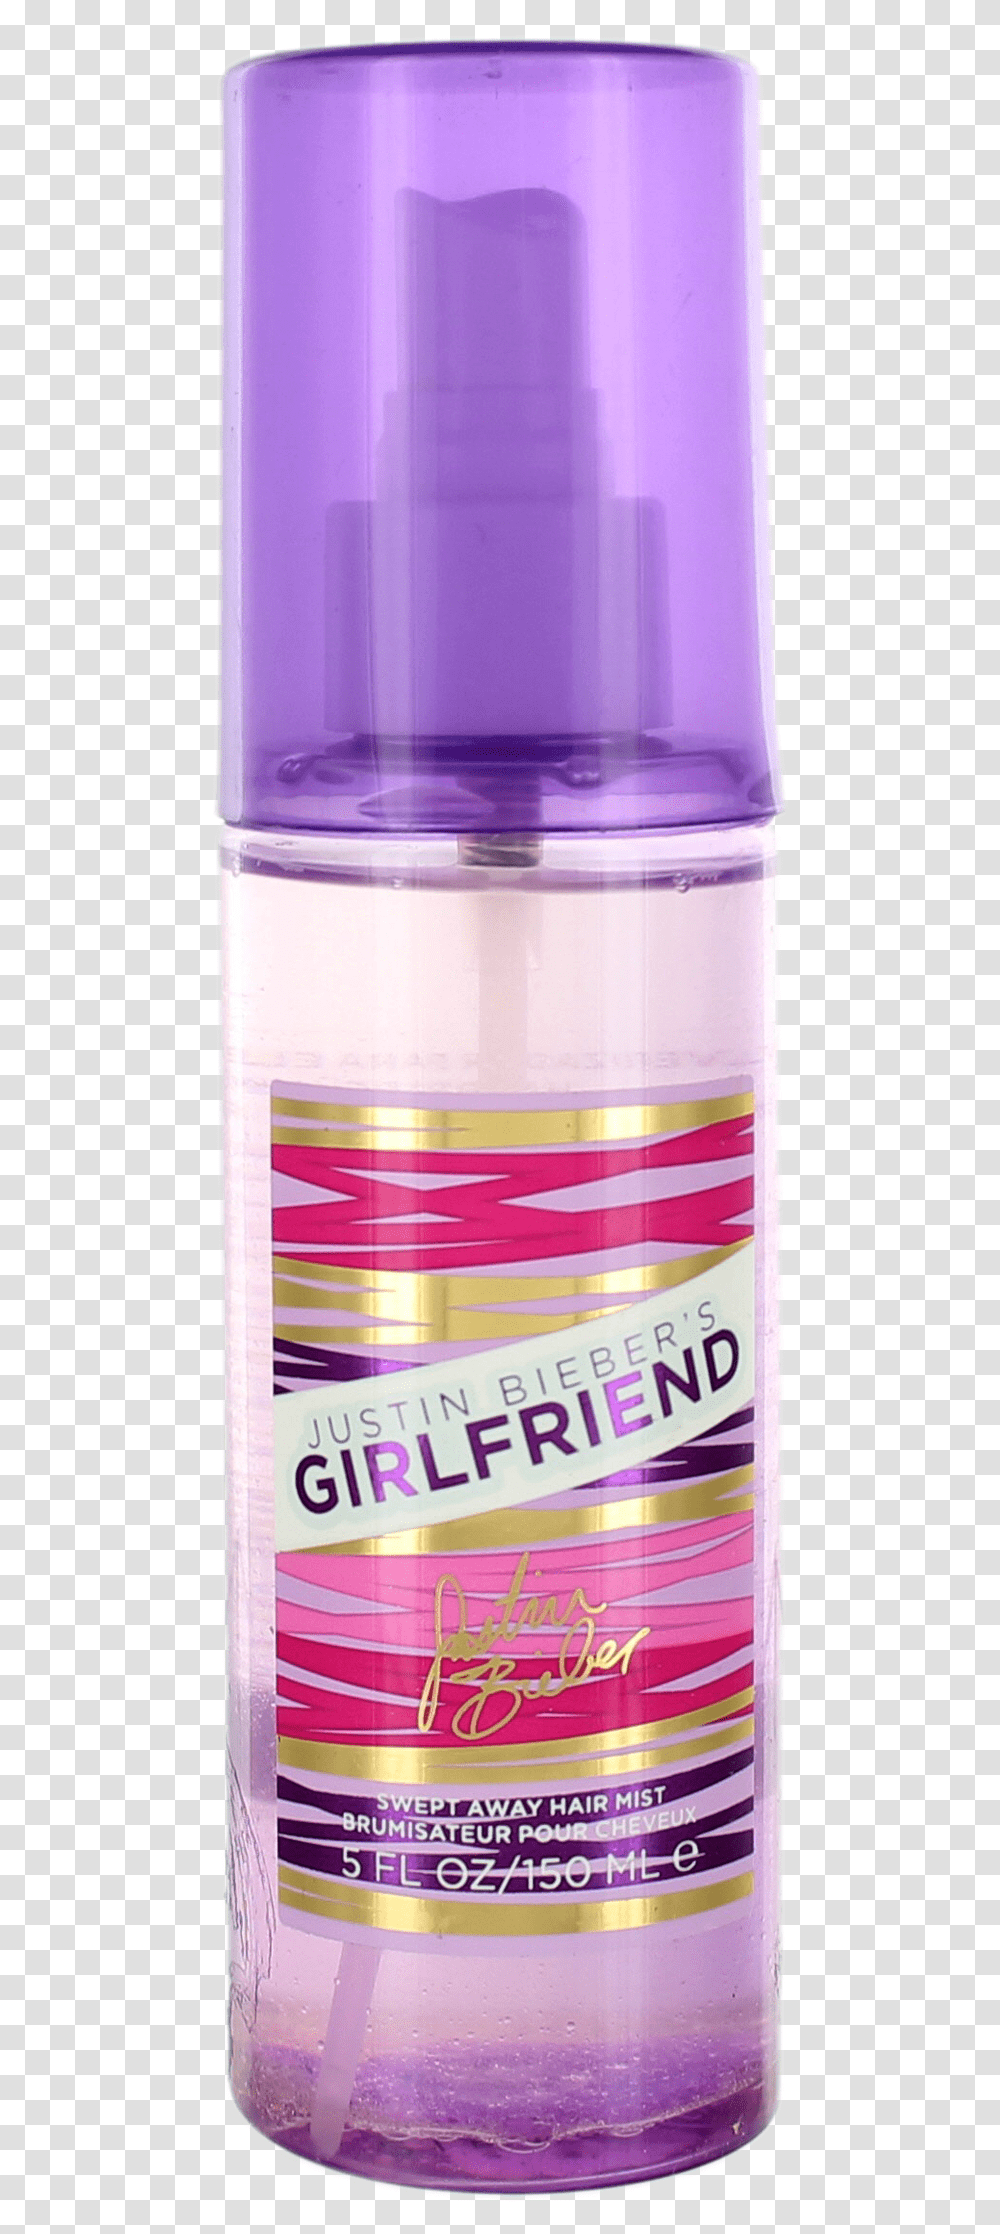 Girlfriend By Justin Bieber For Women Hair Mist Spray Water Bottle, Beer, Alcohol, Beverage, Plant Transparent Png